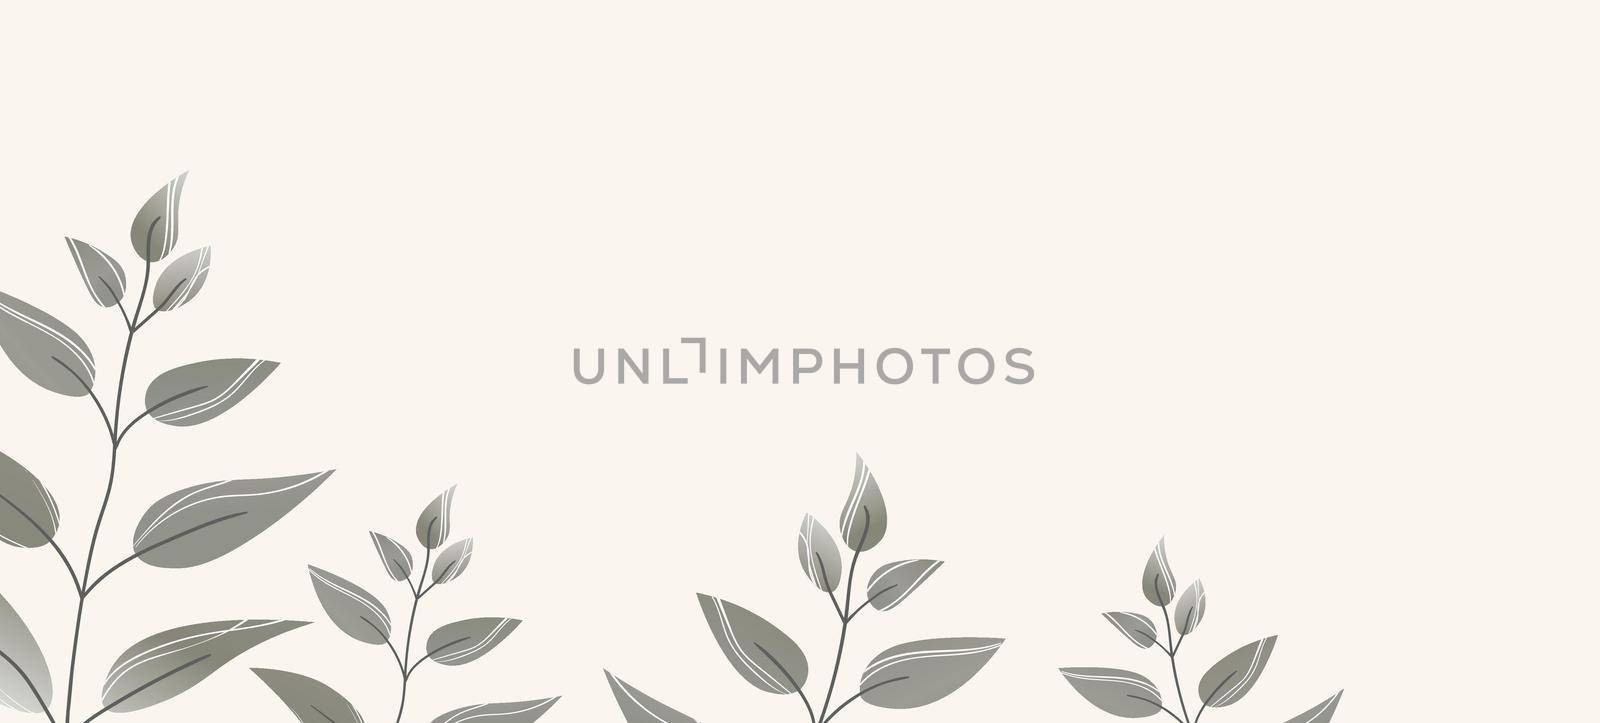 Floral web banner with drawn grey exotic leaves. Nature concept design. Modern floral compositions with summer branches. Vector illustration on the theme of ecology, natura, environment by allaku